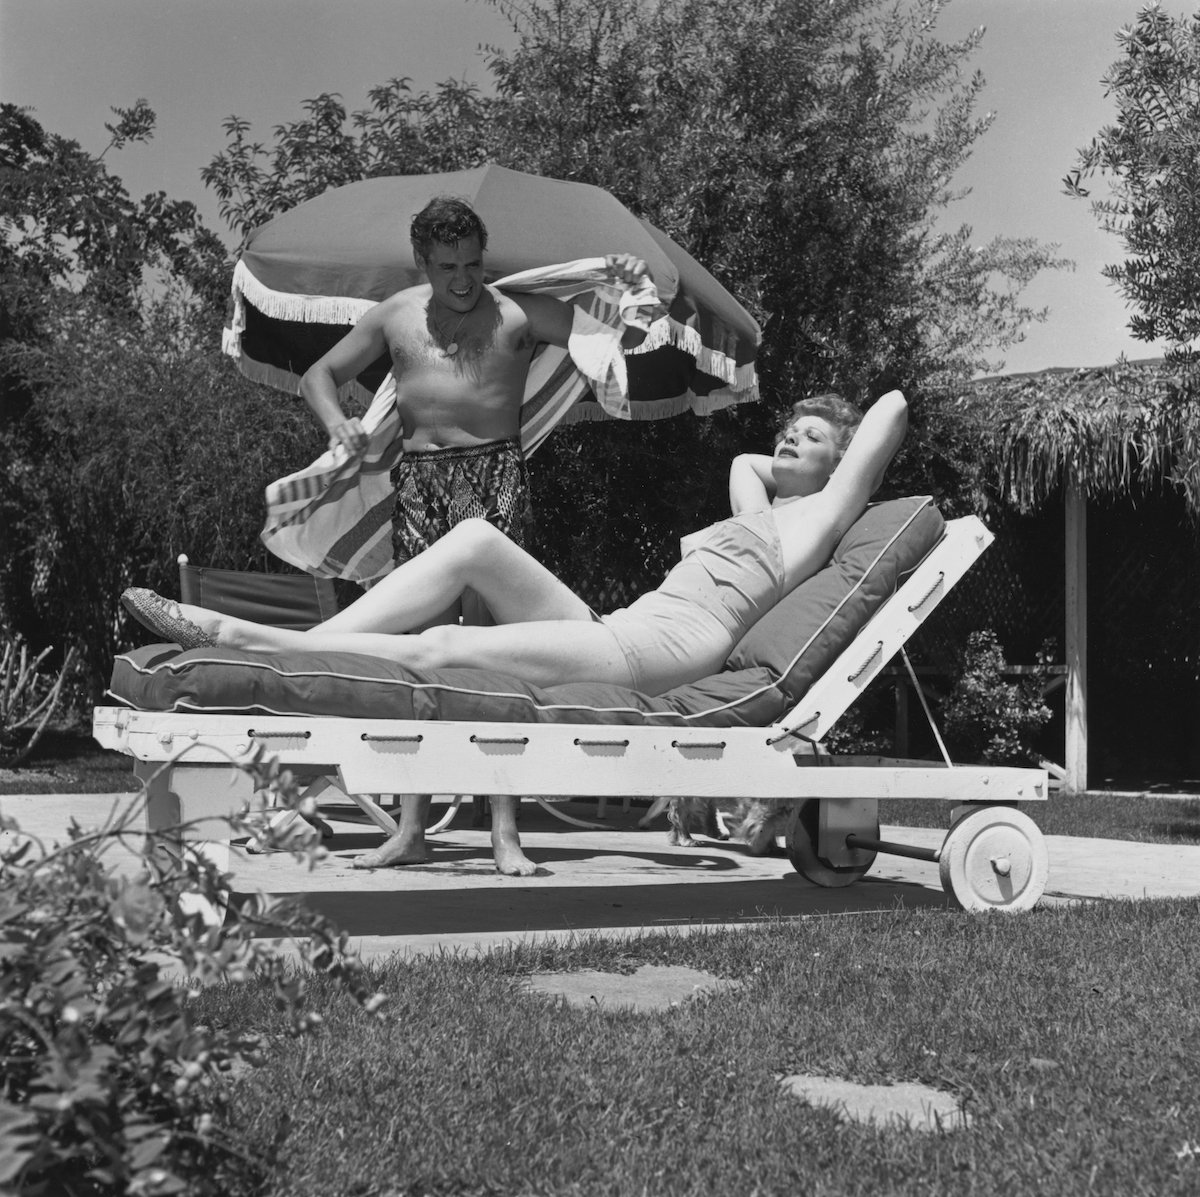 Lucille Ball and Desi Arnaz sun themselves in the garden of their home in 1955